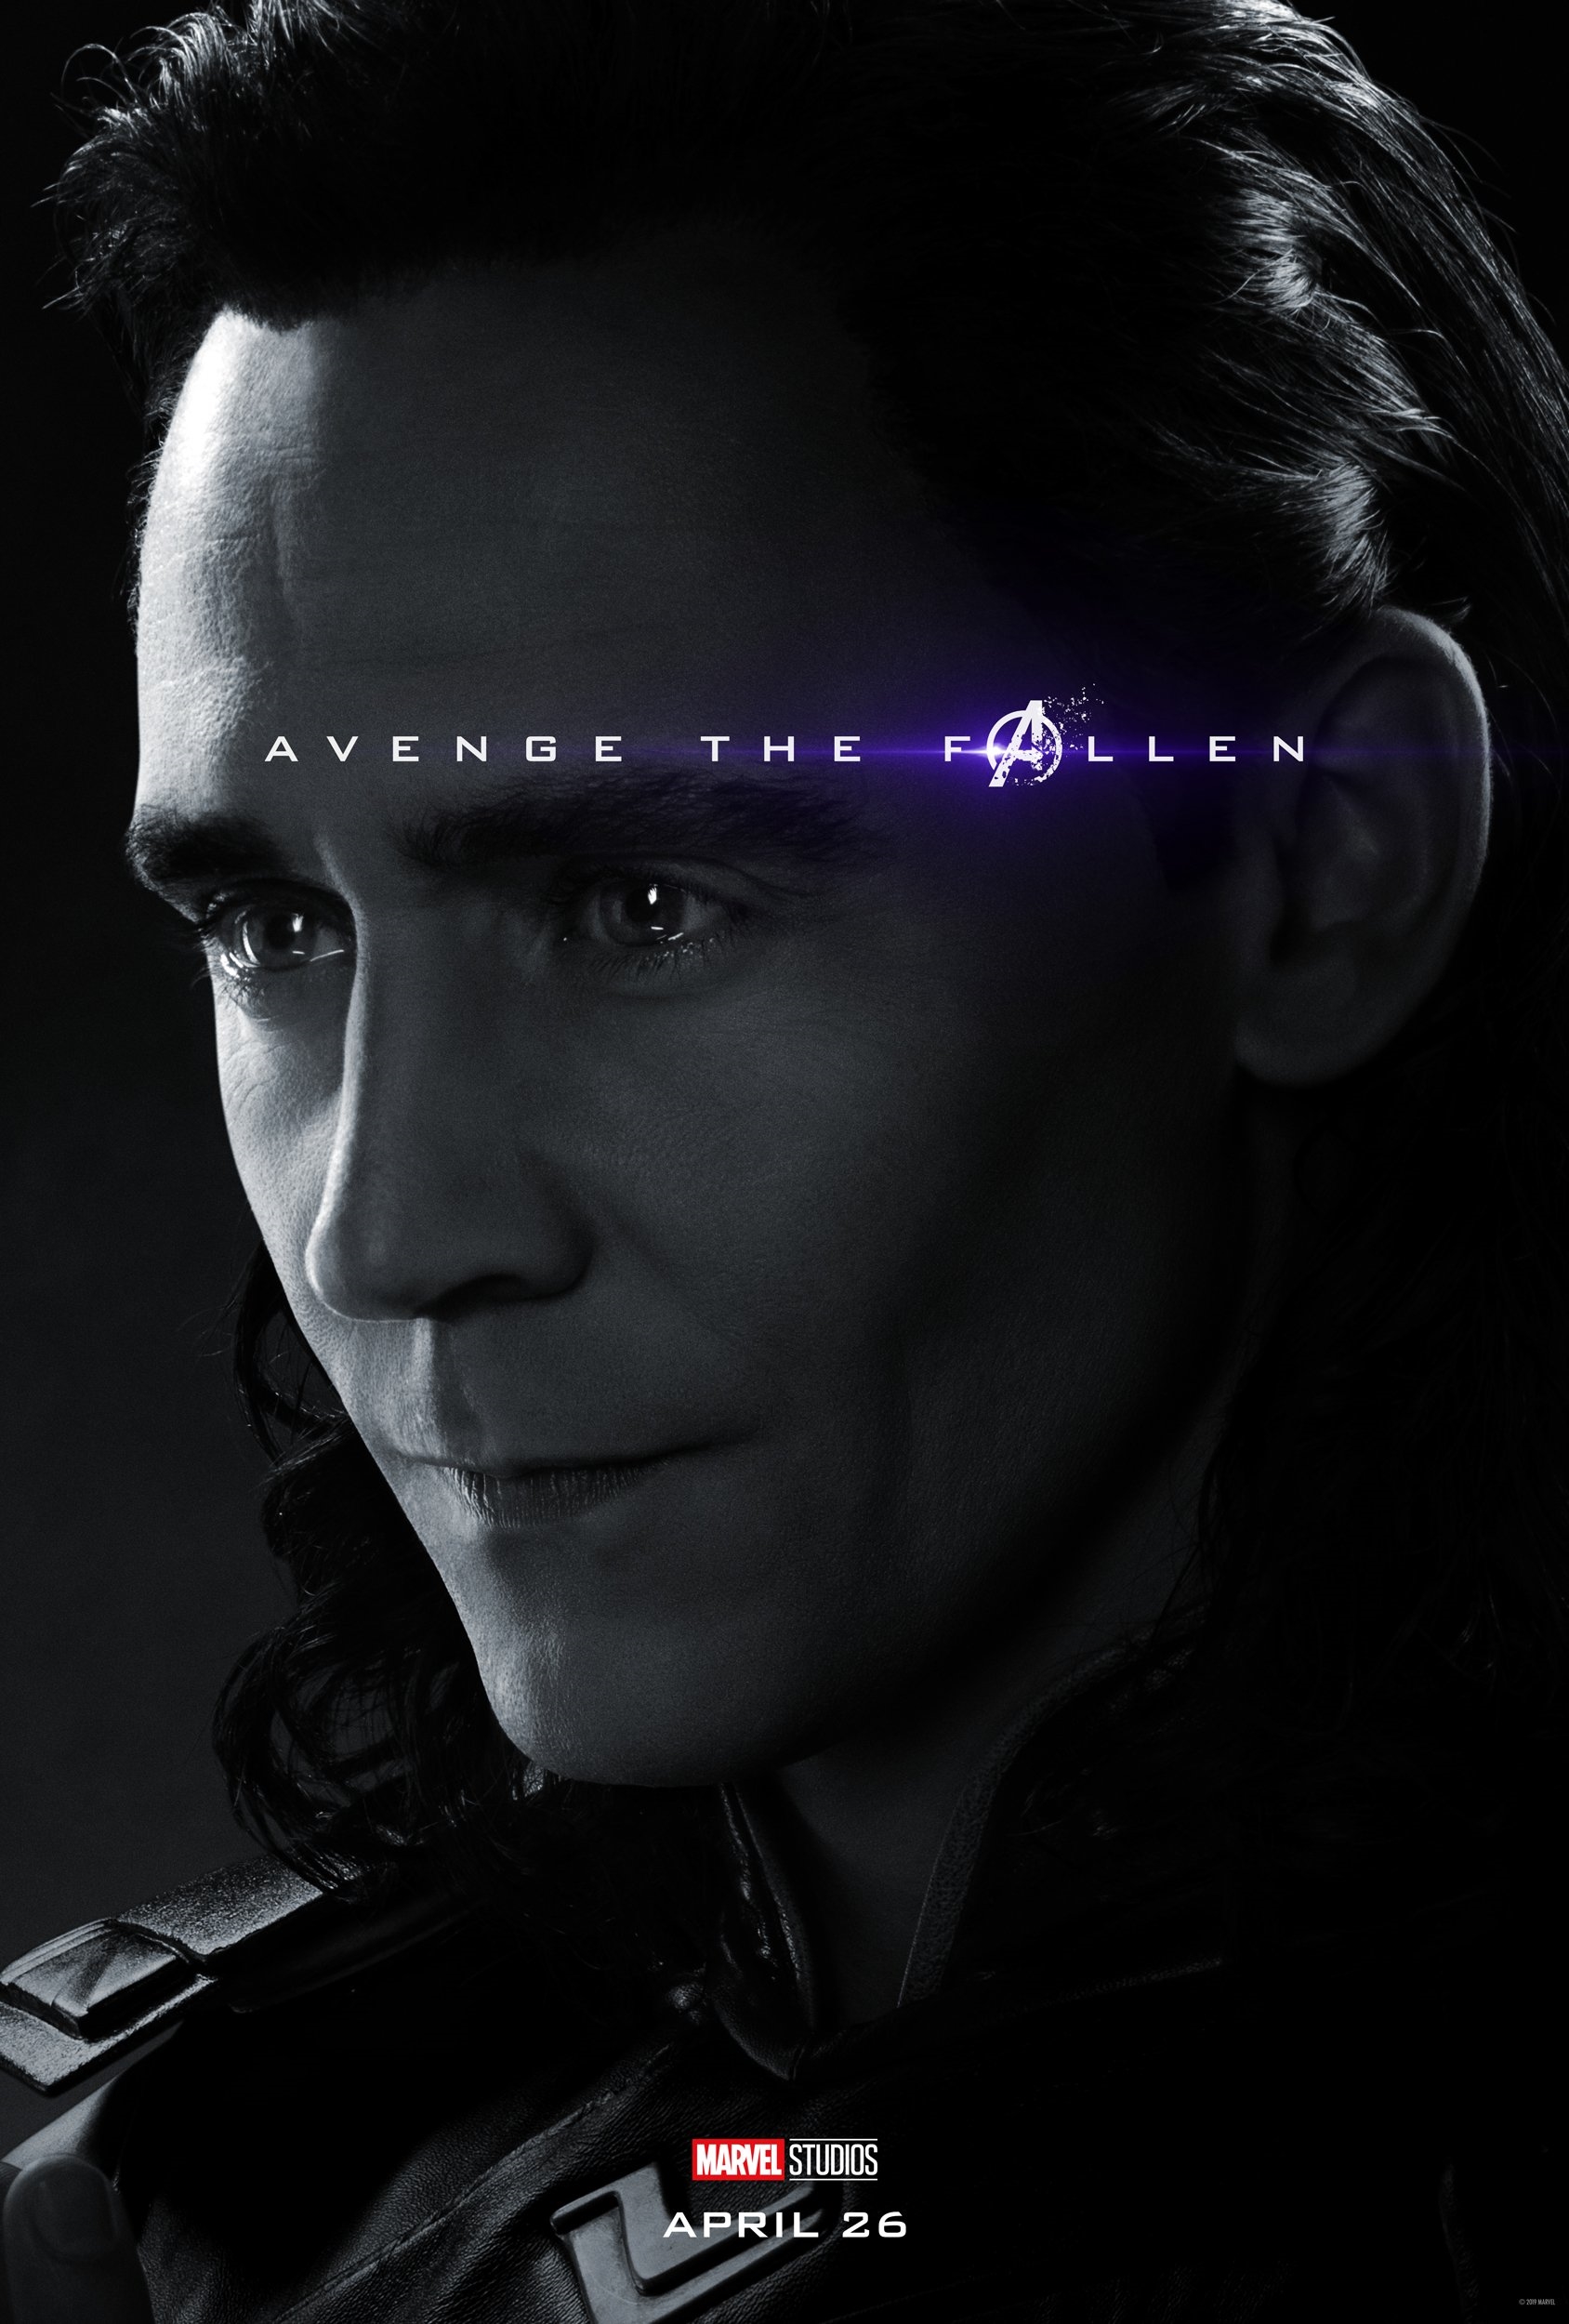 Tom Hiddleston's Loki May Have Taken Inspiration from Attack on